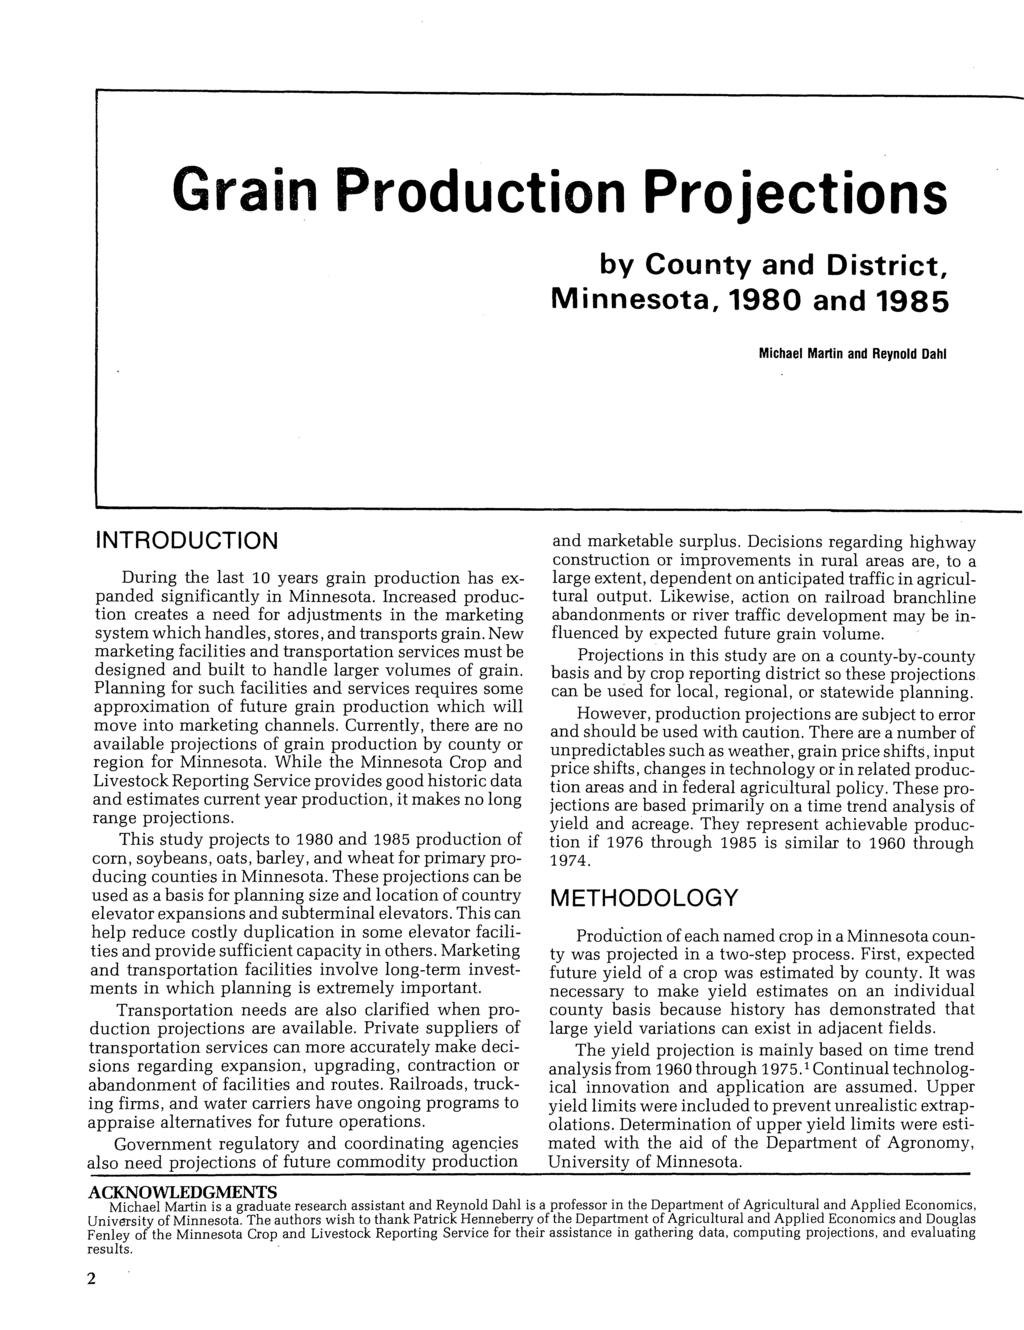 Grain Production Projections by County and District, Minnesota, 1980 and 1985 Michael Martin and Reynold Dahl INTRODUCTION During the last 10 years grain has expanded significantly in Minnesota.